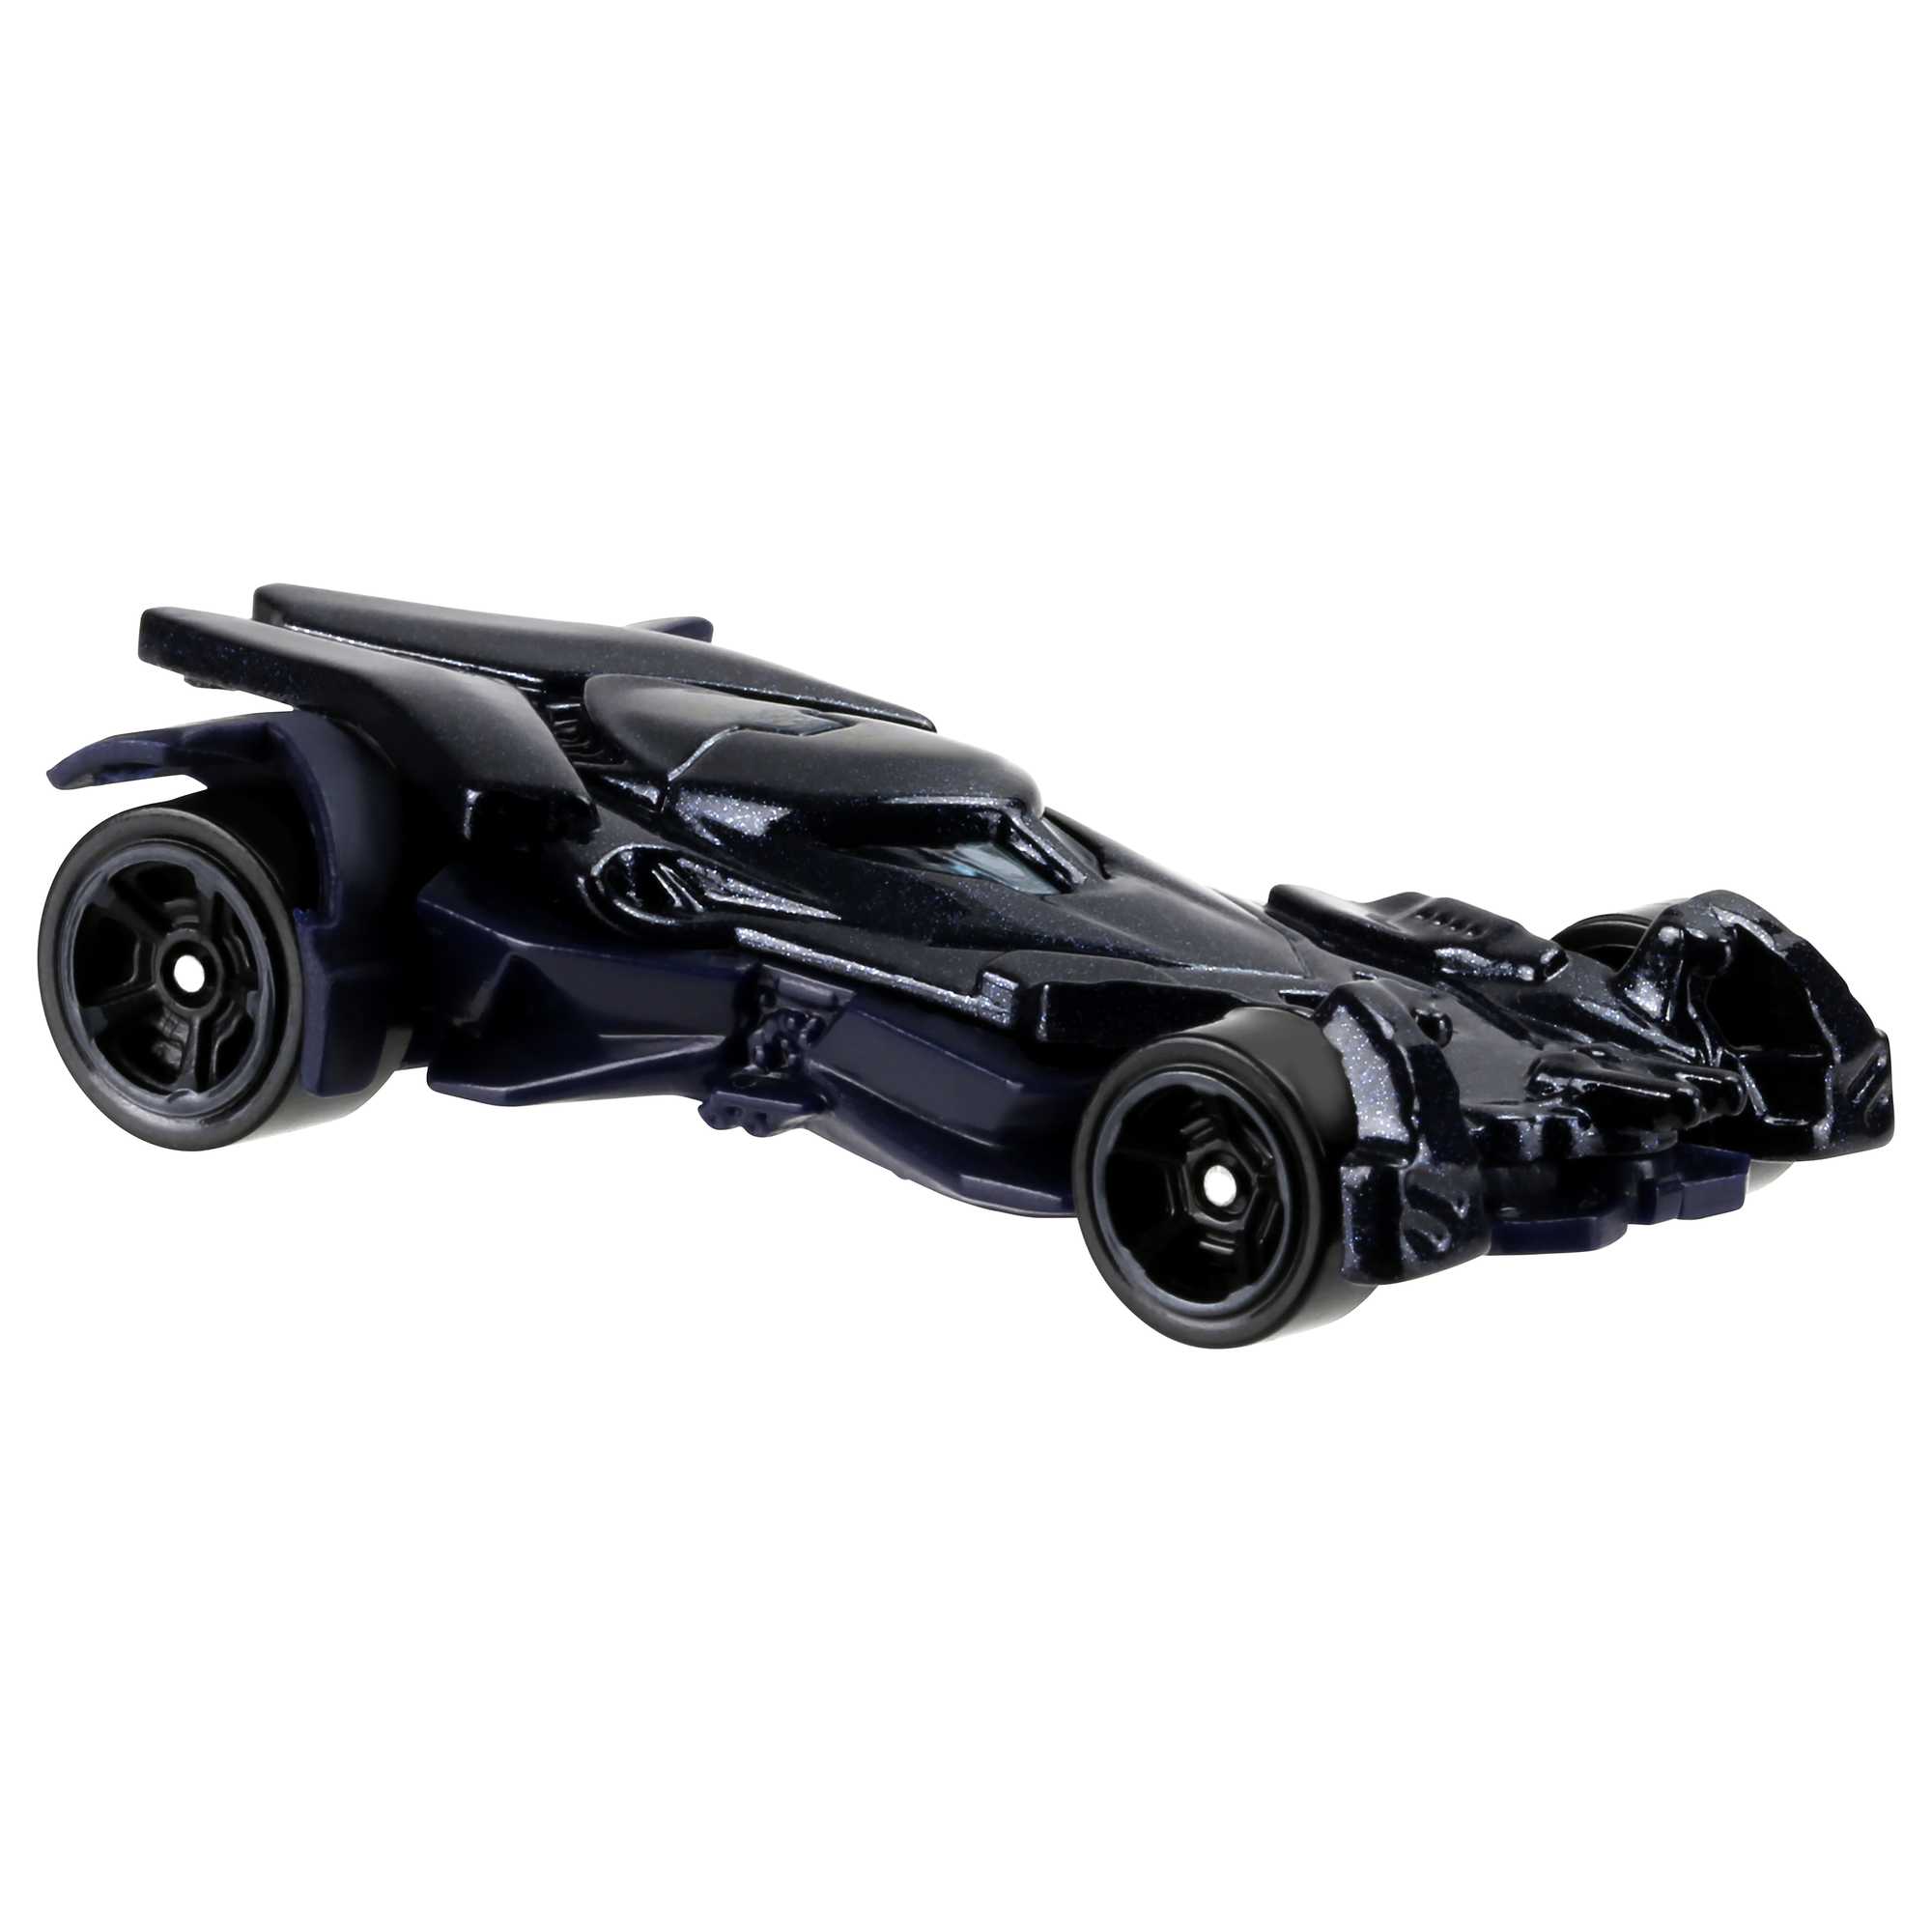 Hot Wheels Batman-Themed 1:64 Scale Vehicle, Popular Hero & Villain Casting  from the Global Franchise, Die-Cast, Toy for Collectors & Kids 3 Years Old  & Up | HDG89 | MATTEL